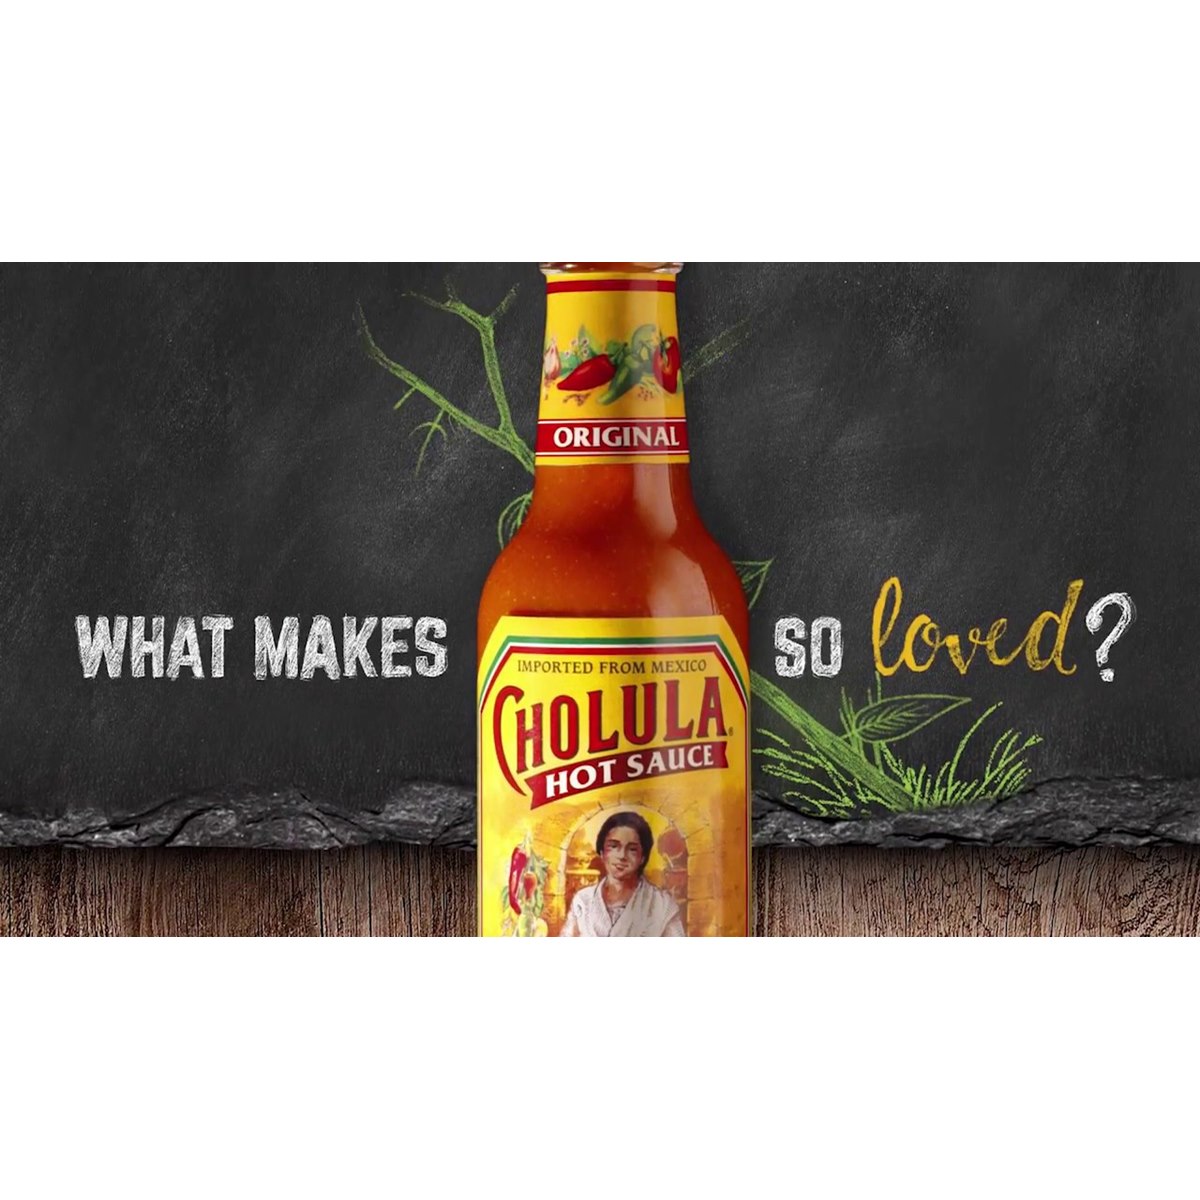 Where to Buy Cholula in the UK